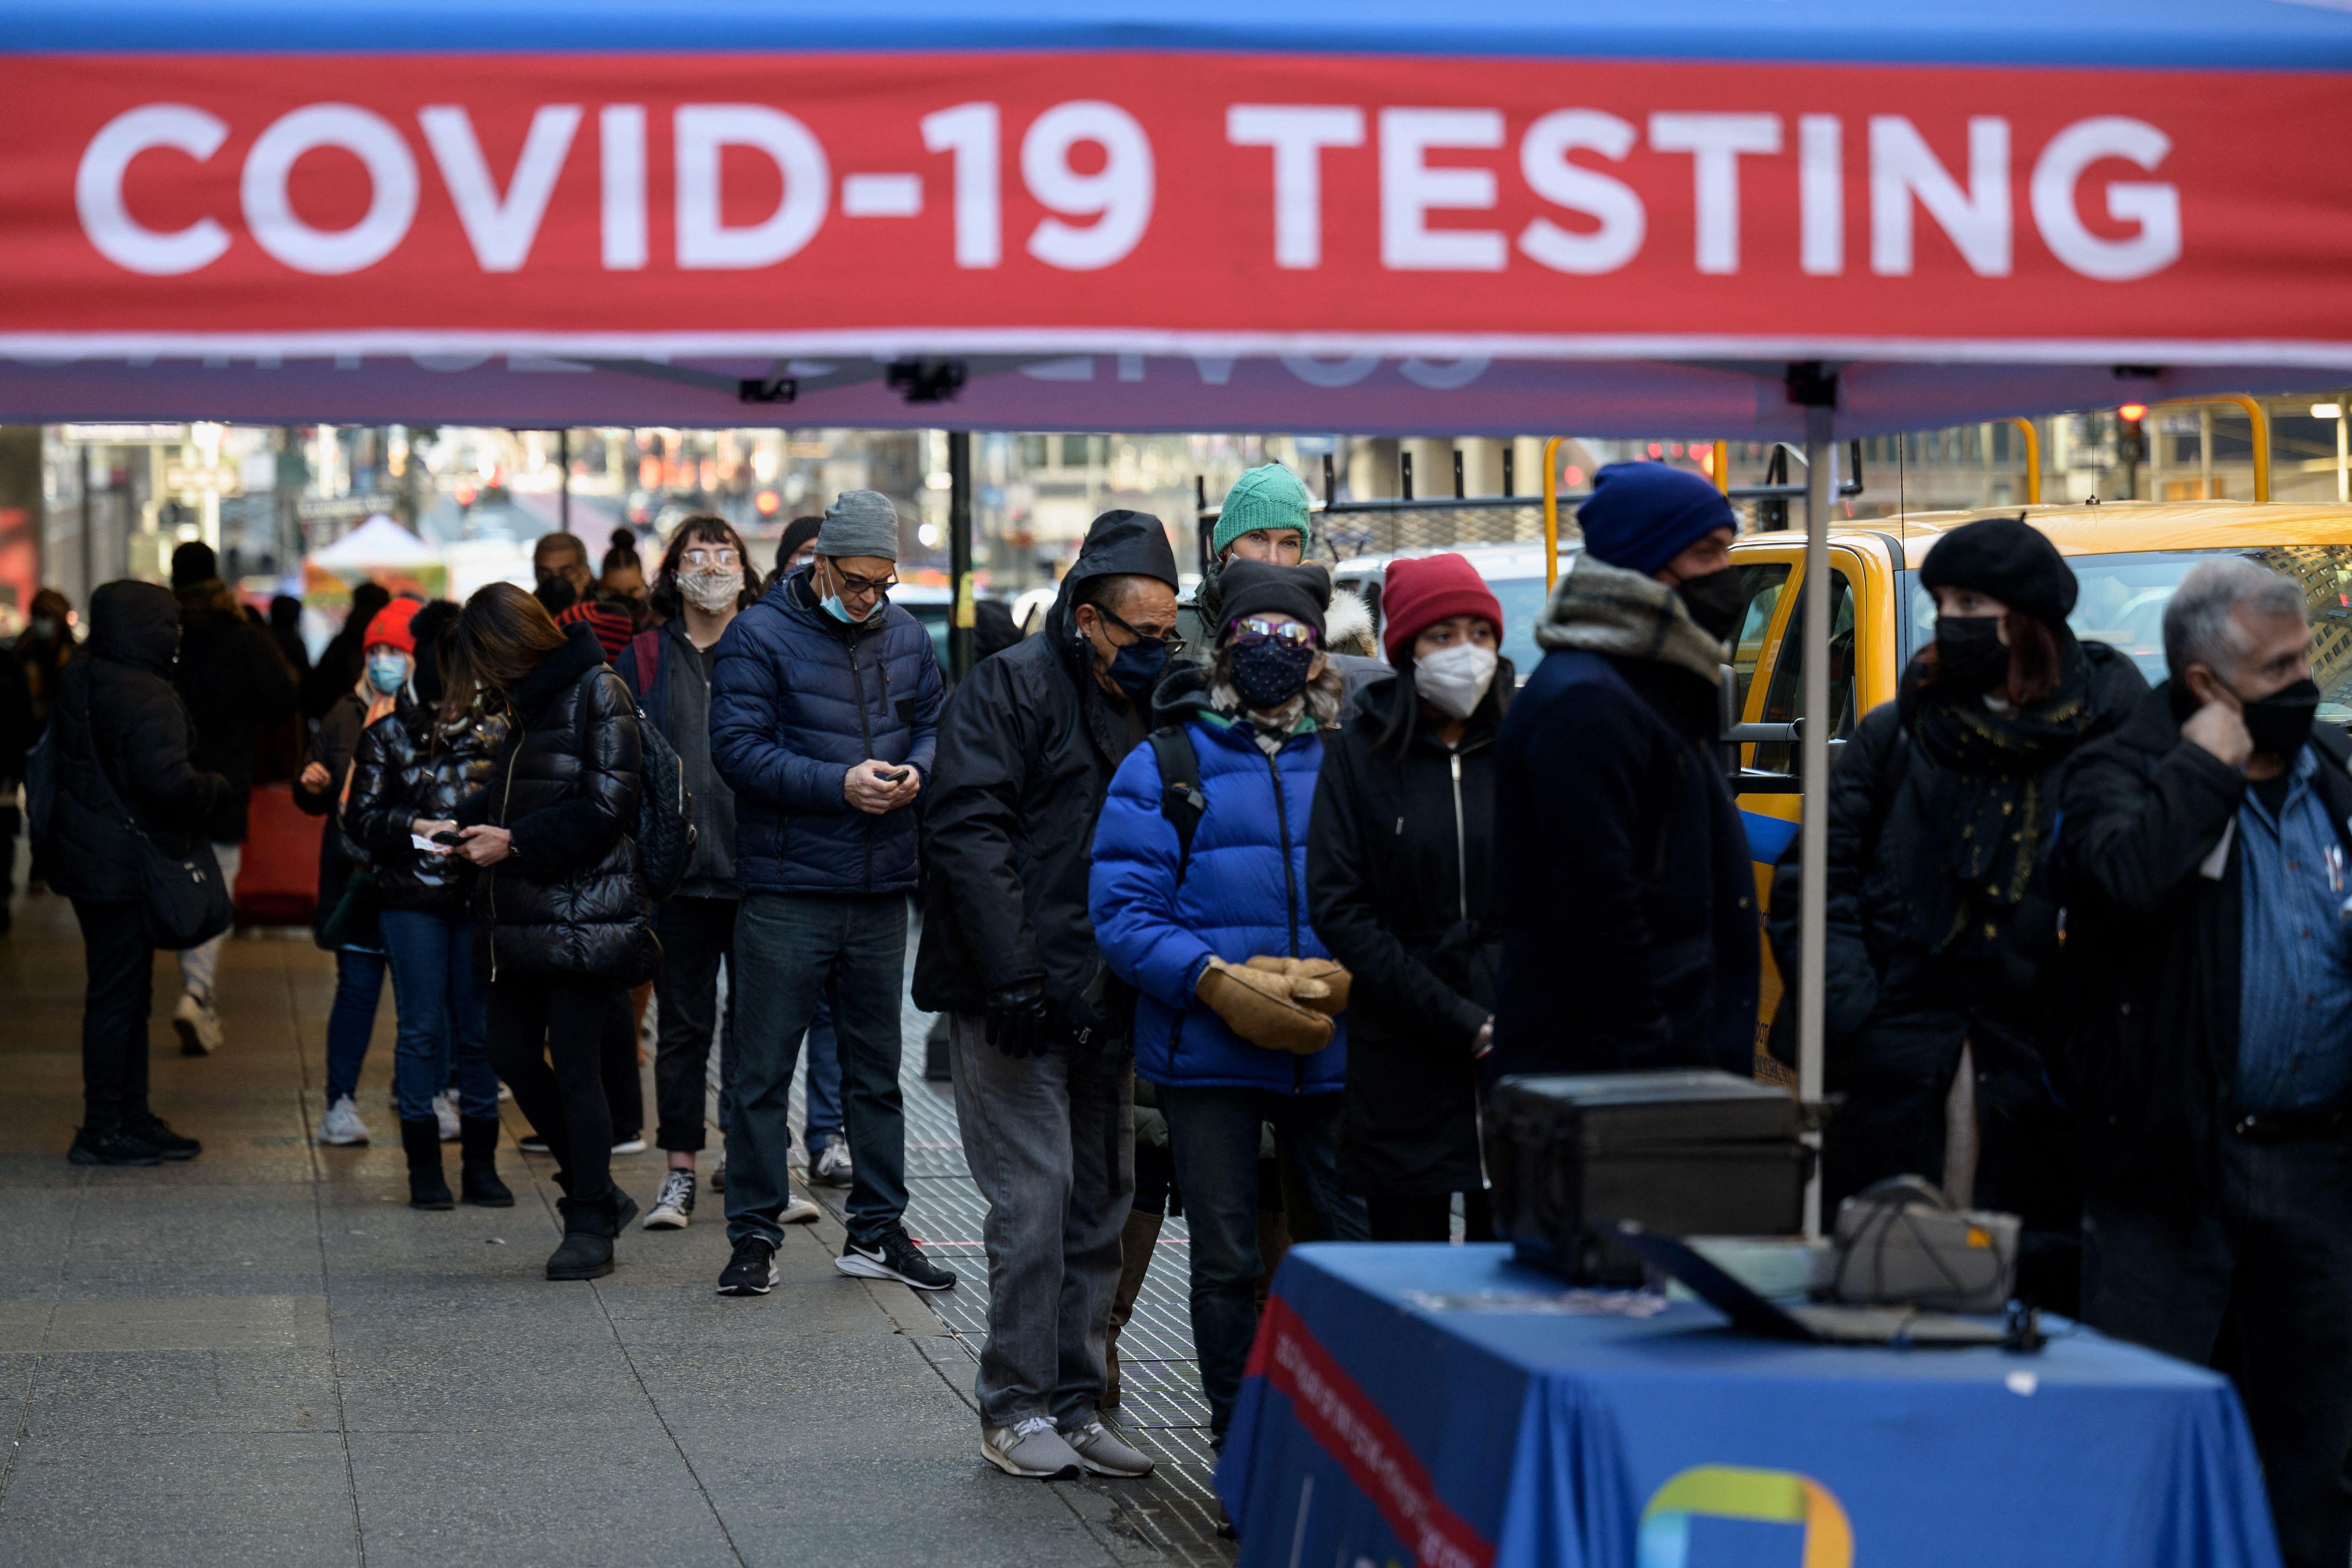 People wait in line on a sidewalk to receive a COVID-19 test